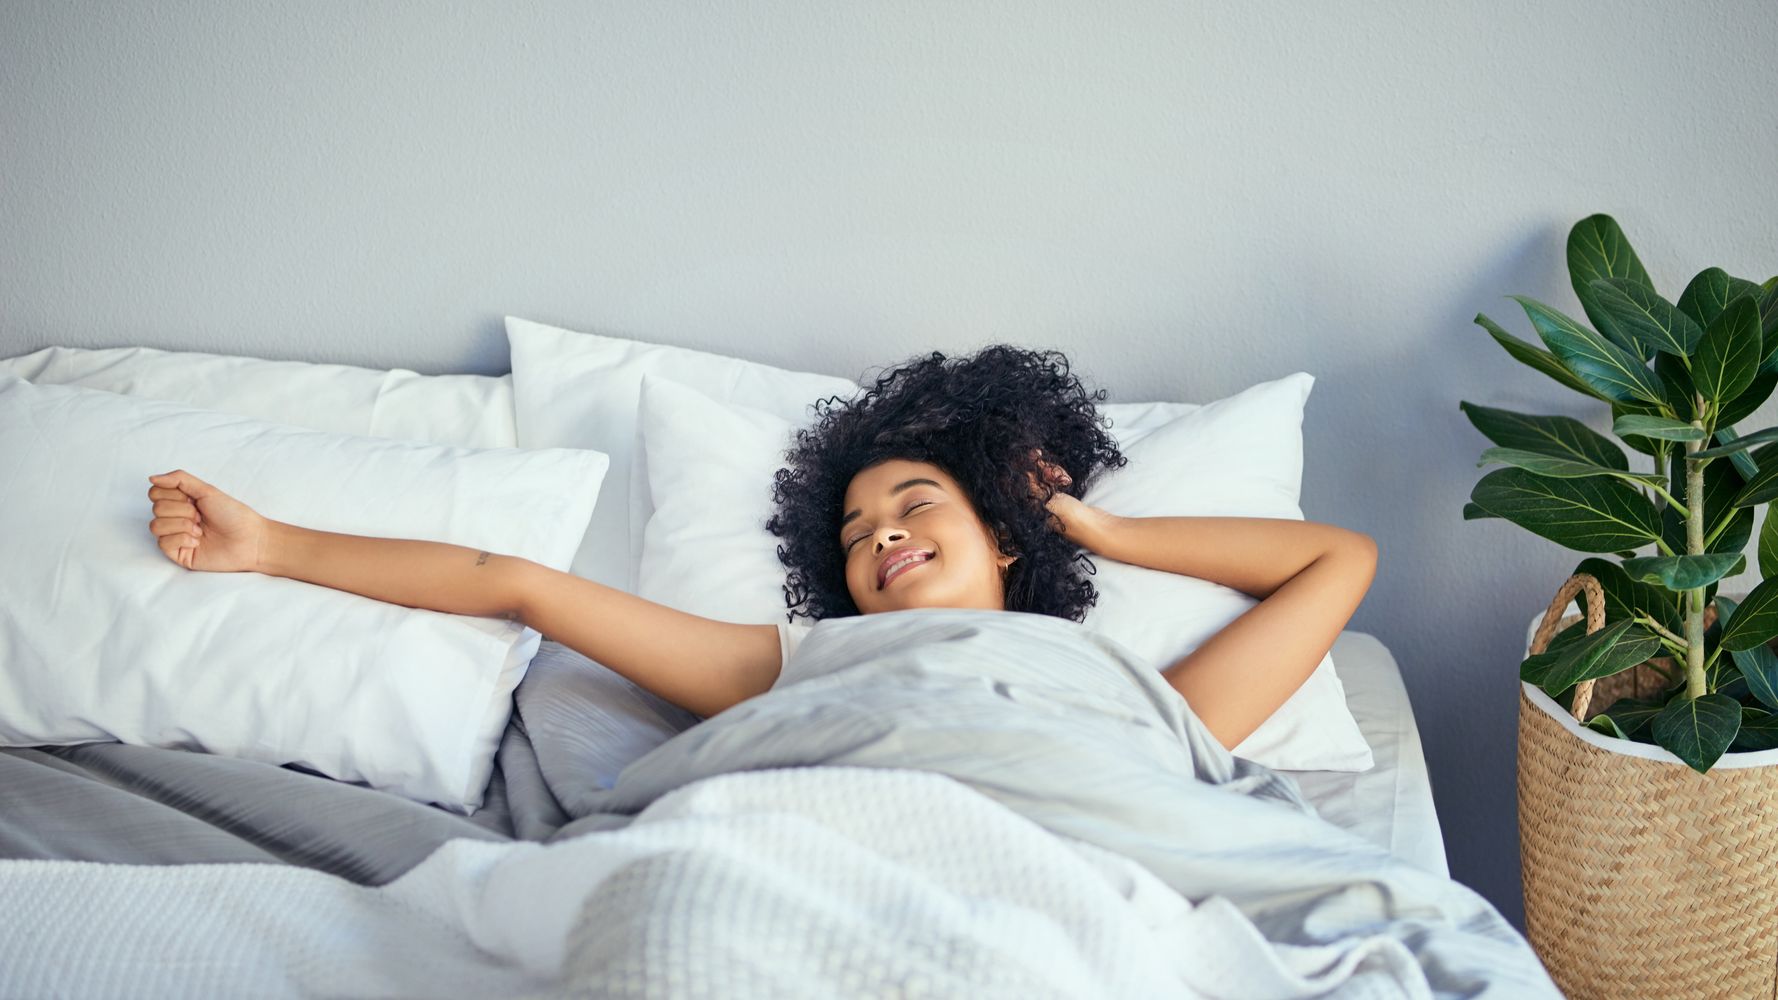 12 Products That Will Make Your Mornings Infinitely Better And Calmer